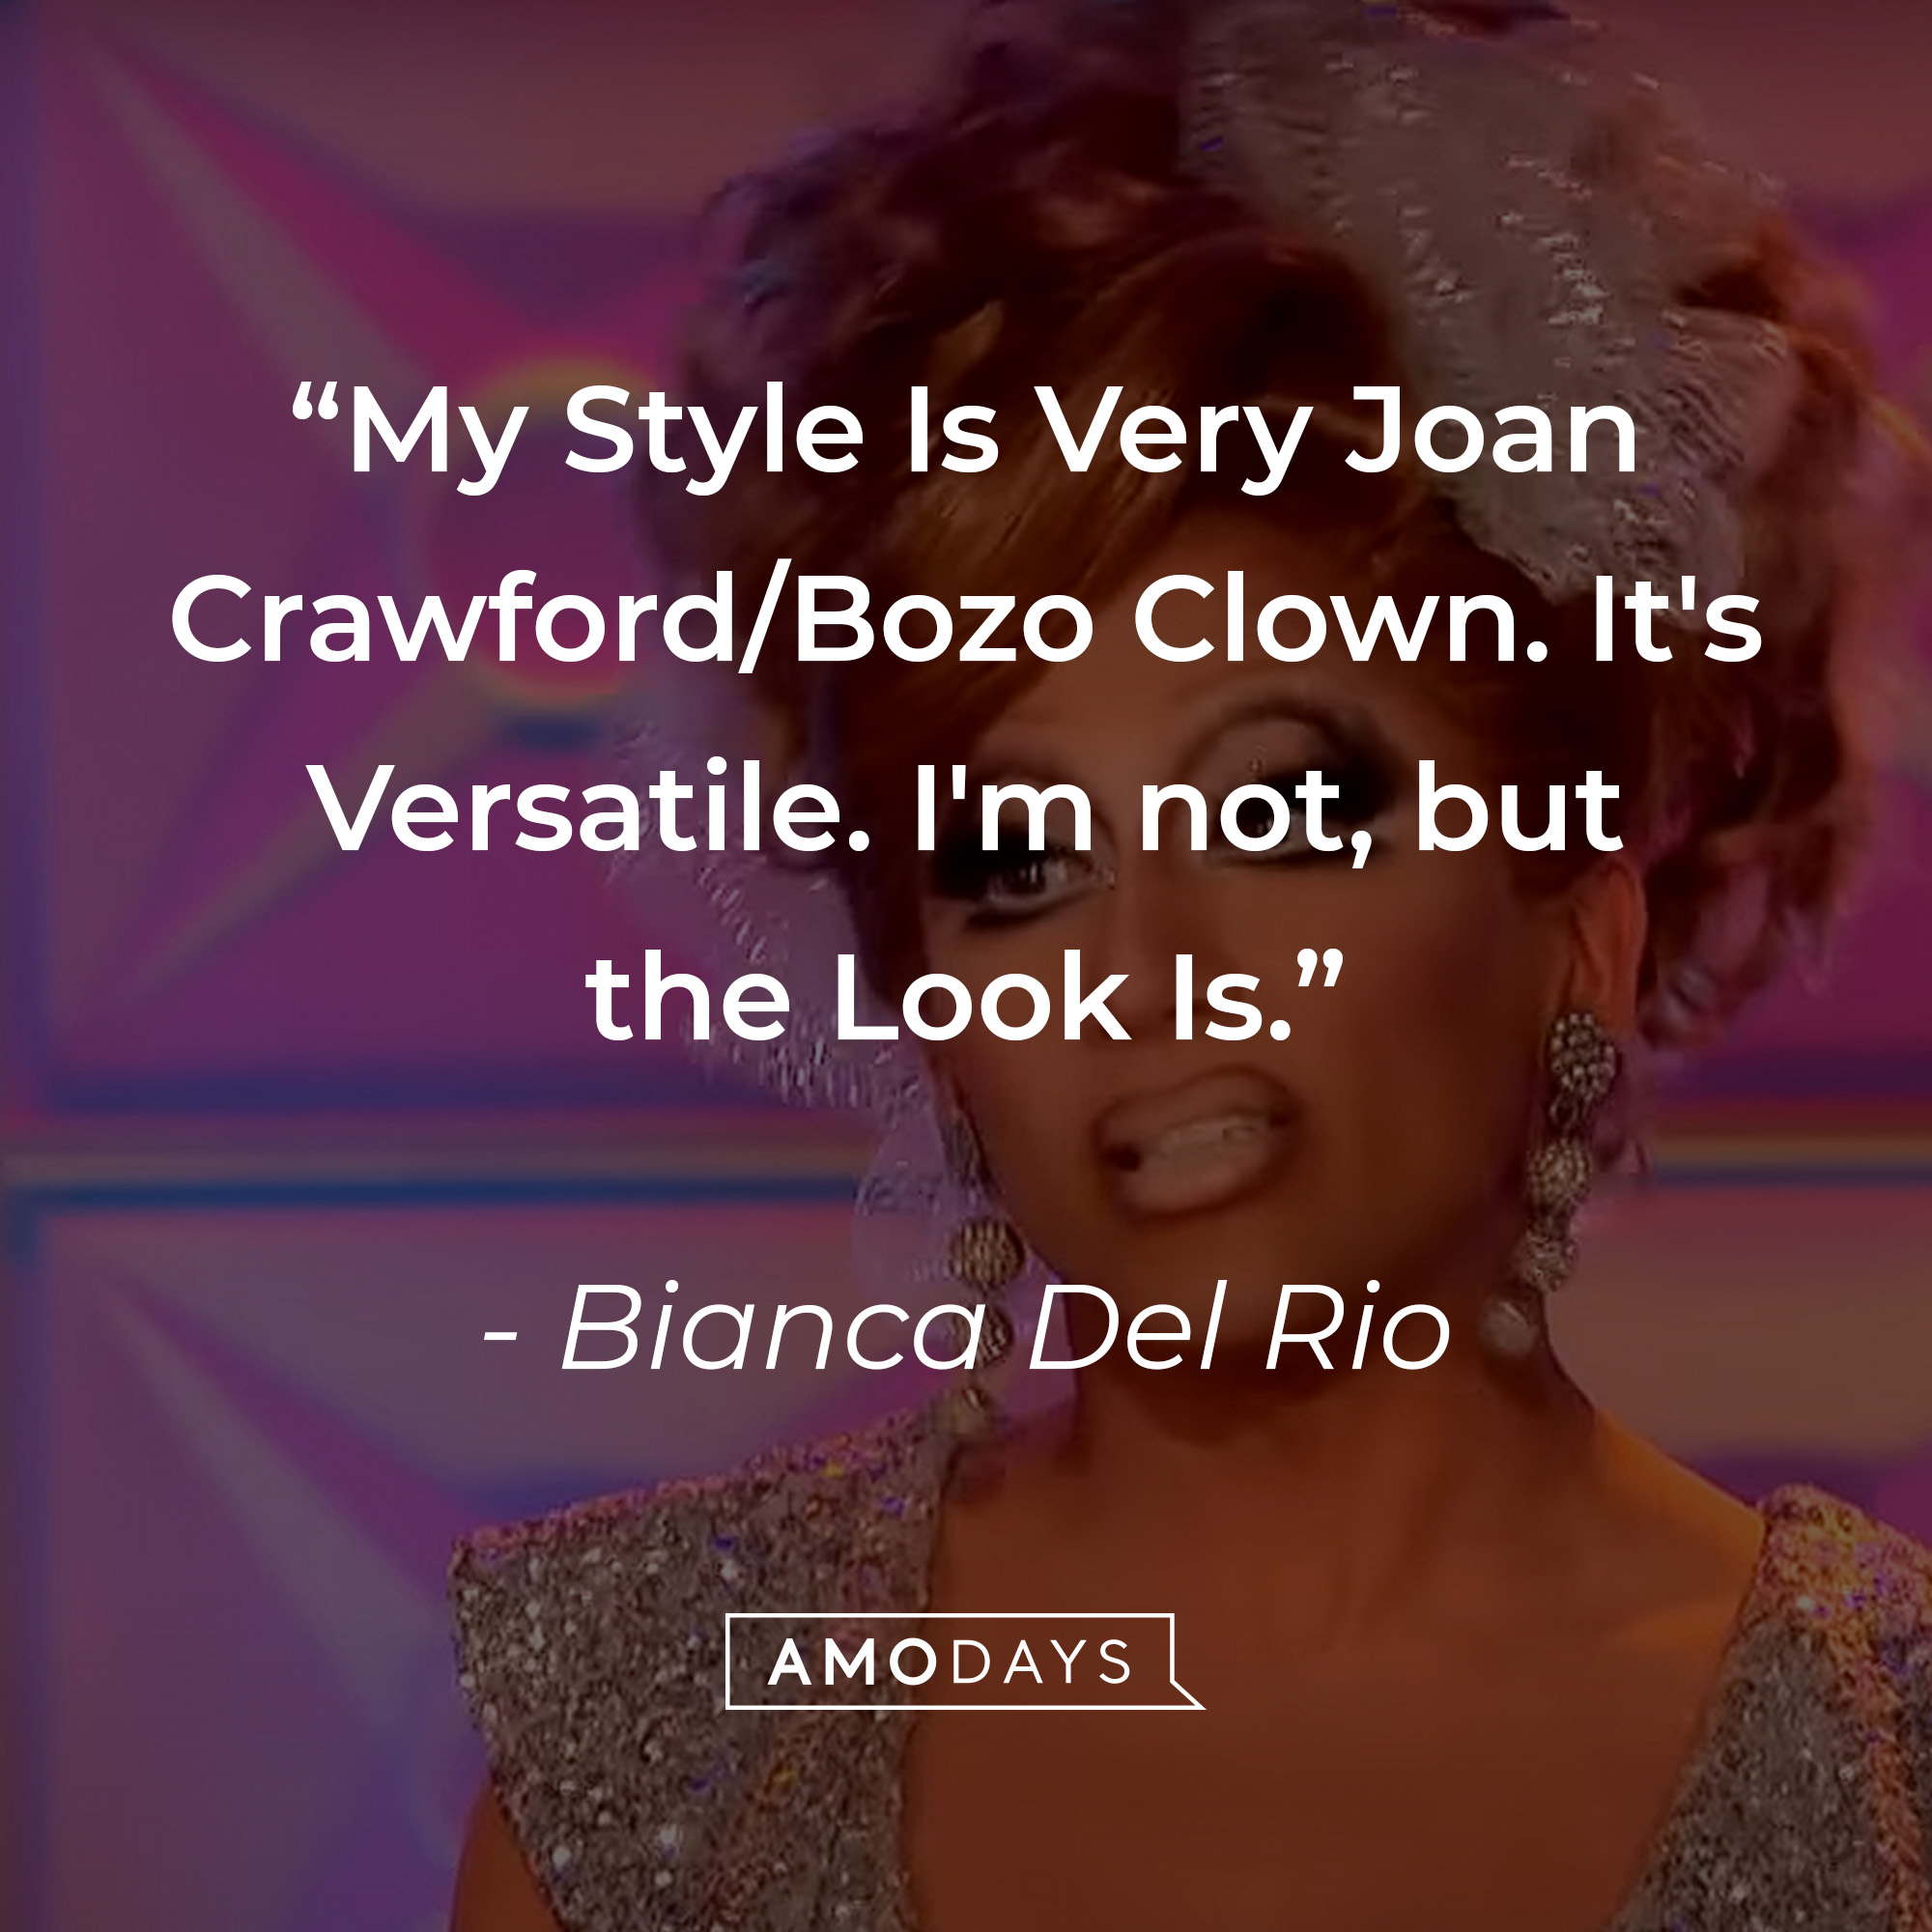 Bianca Del Rio's quote: “My Style Is Very Joan Crawford/Bozo Clown. It's Versatile. I'm not, but the Look Is.” | Source: youtube.com/rupaulsdragrace